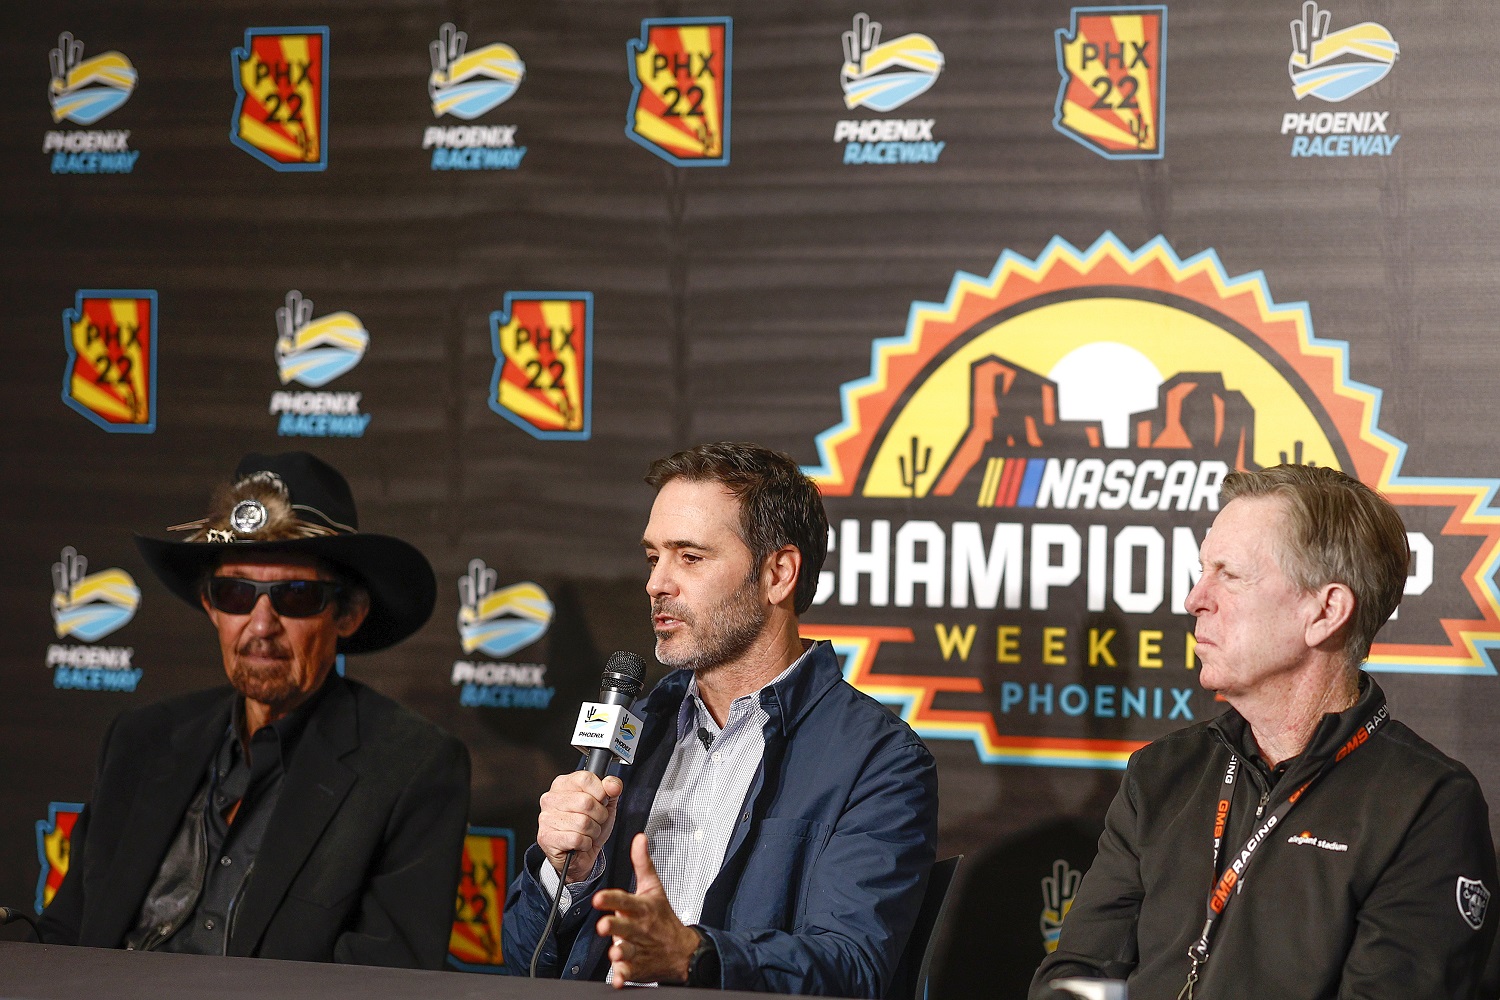 Jimmie Johnson, center, speaks to the media announcing he has taken an ownership stake in Petty GMS Motorsports as team owners Richard Petty, left, and Maury Gallagher look on. | Chris Graythen/Getty Images